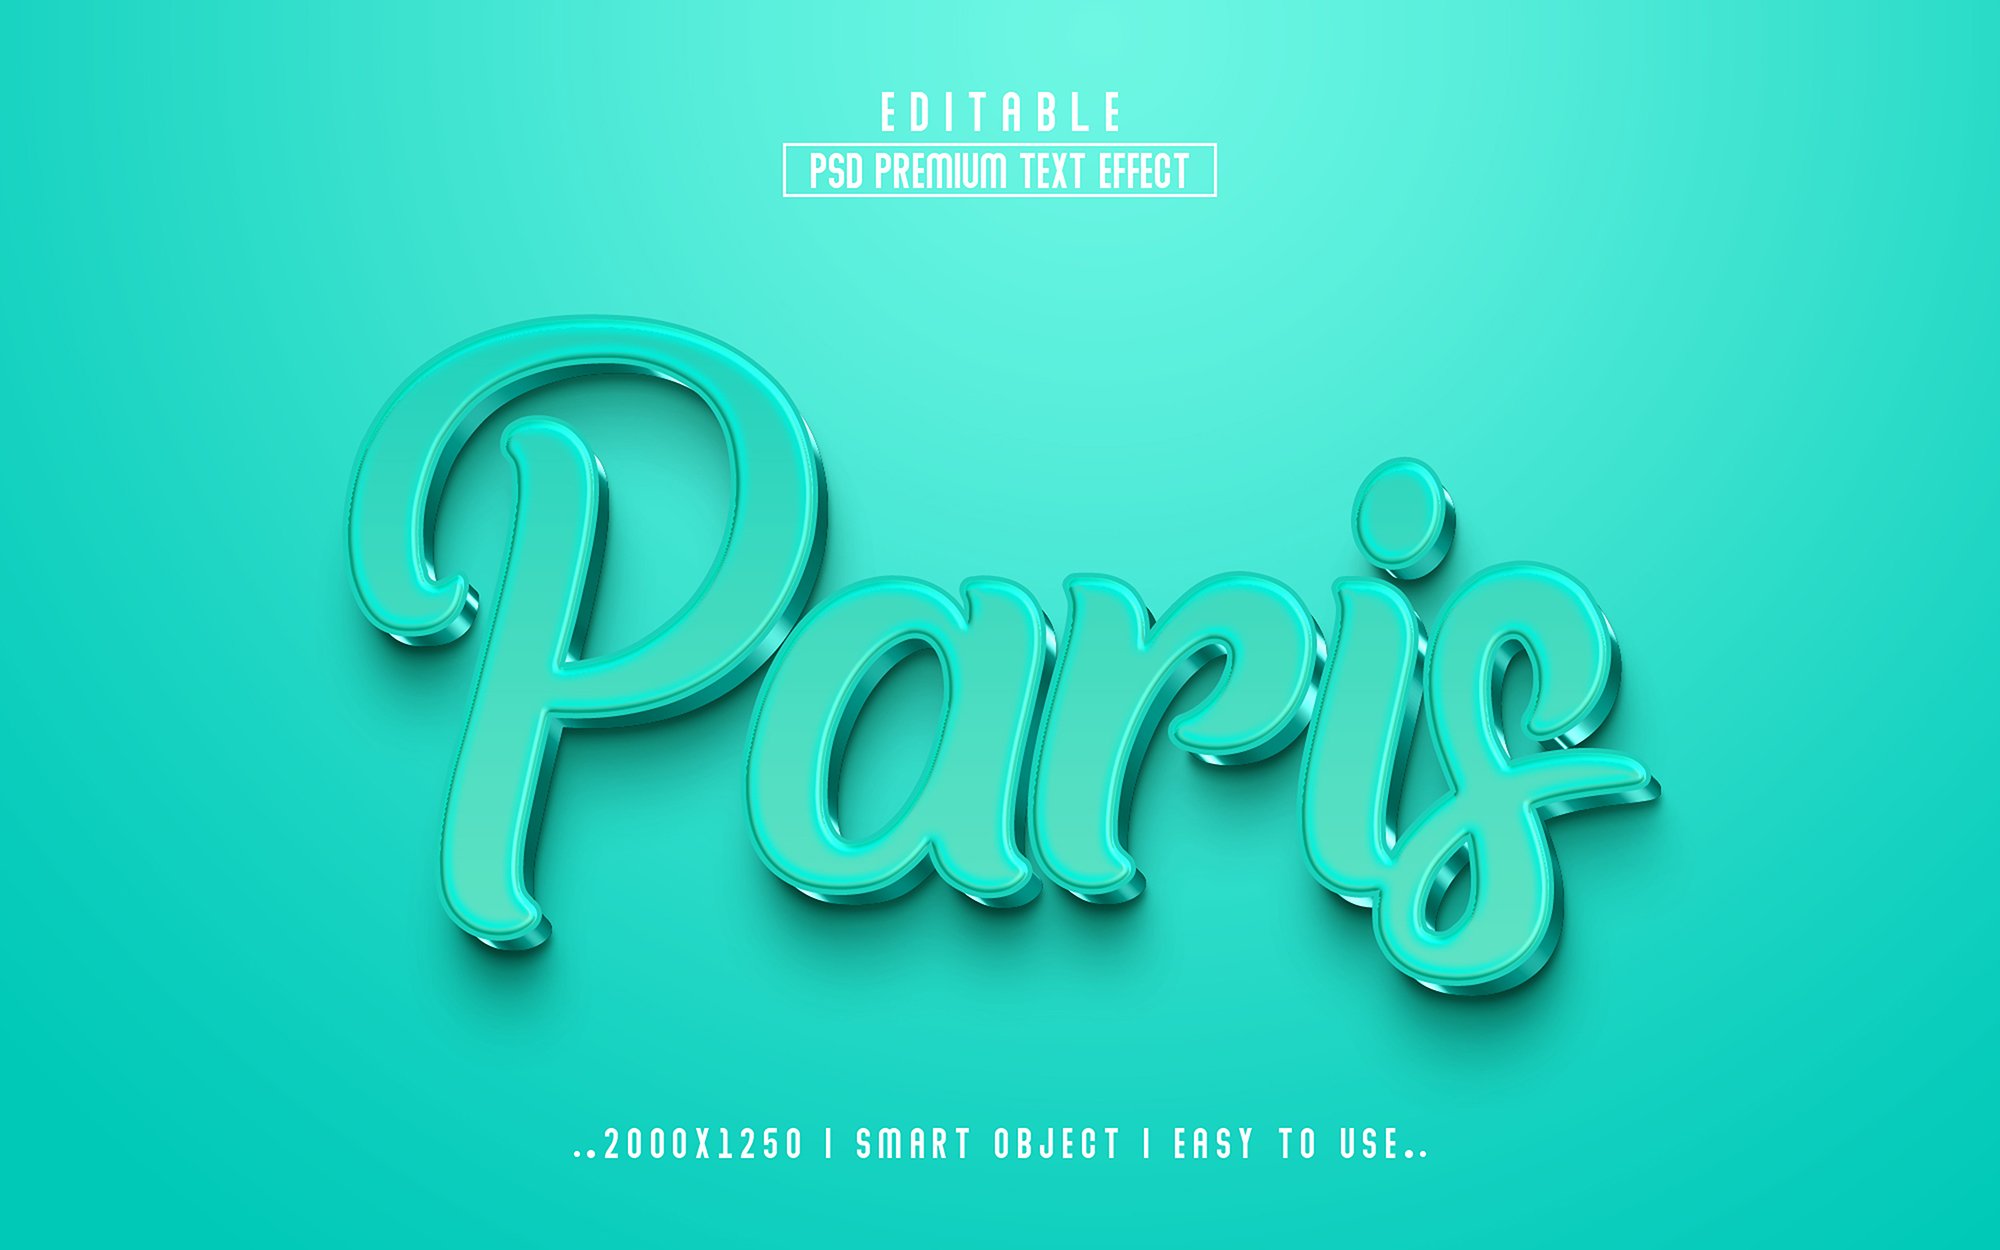 The word paris in 3d type on a green background.